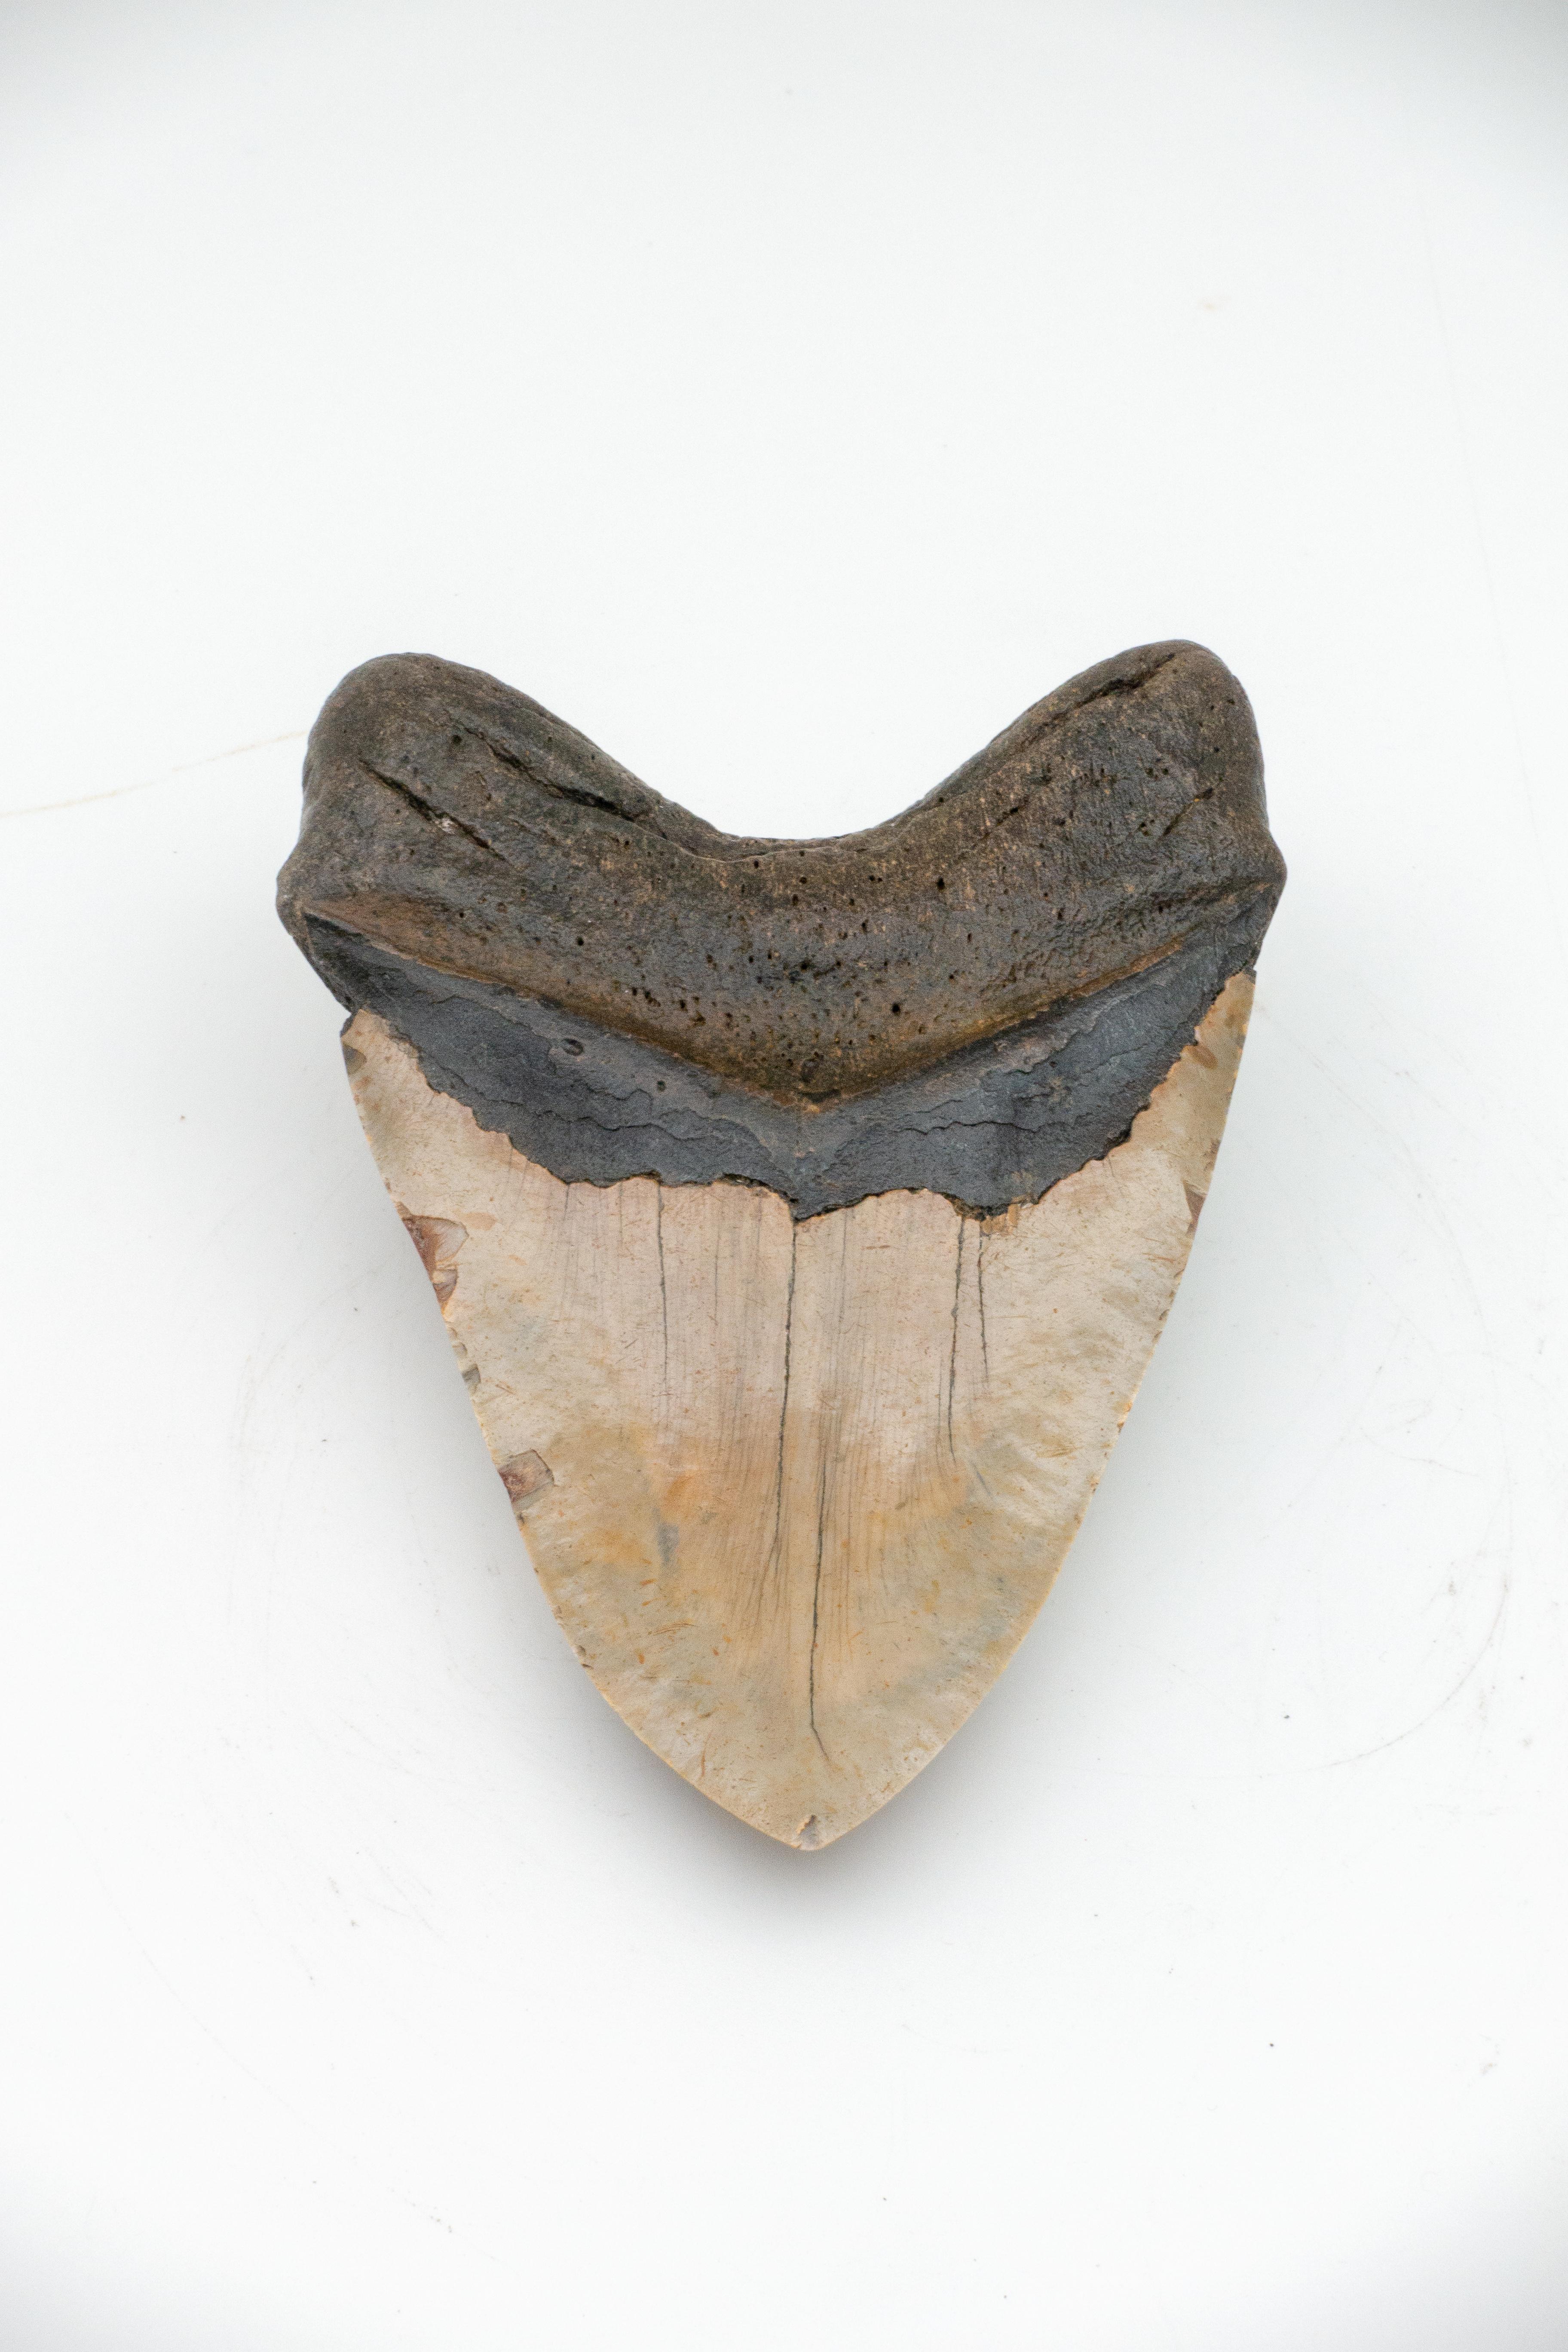 Large fossilized megalodon tooth found in the Gulf coast. The megalodon is an extinct species of shark that lived approximately 23 - 2.6 million years ago; regarded as one of the largest and most powerful predators to have ever lived, fossil remains